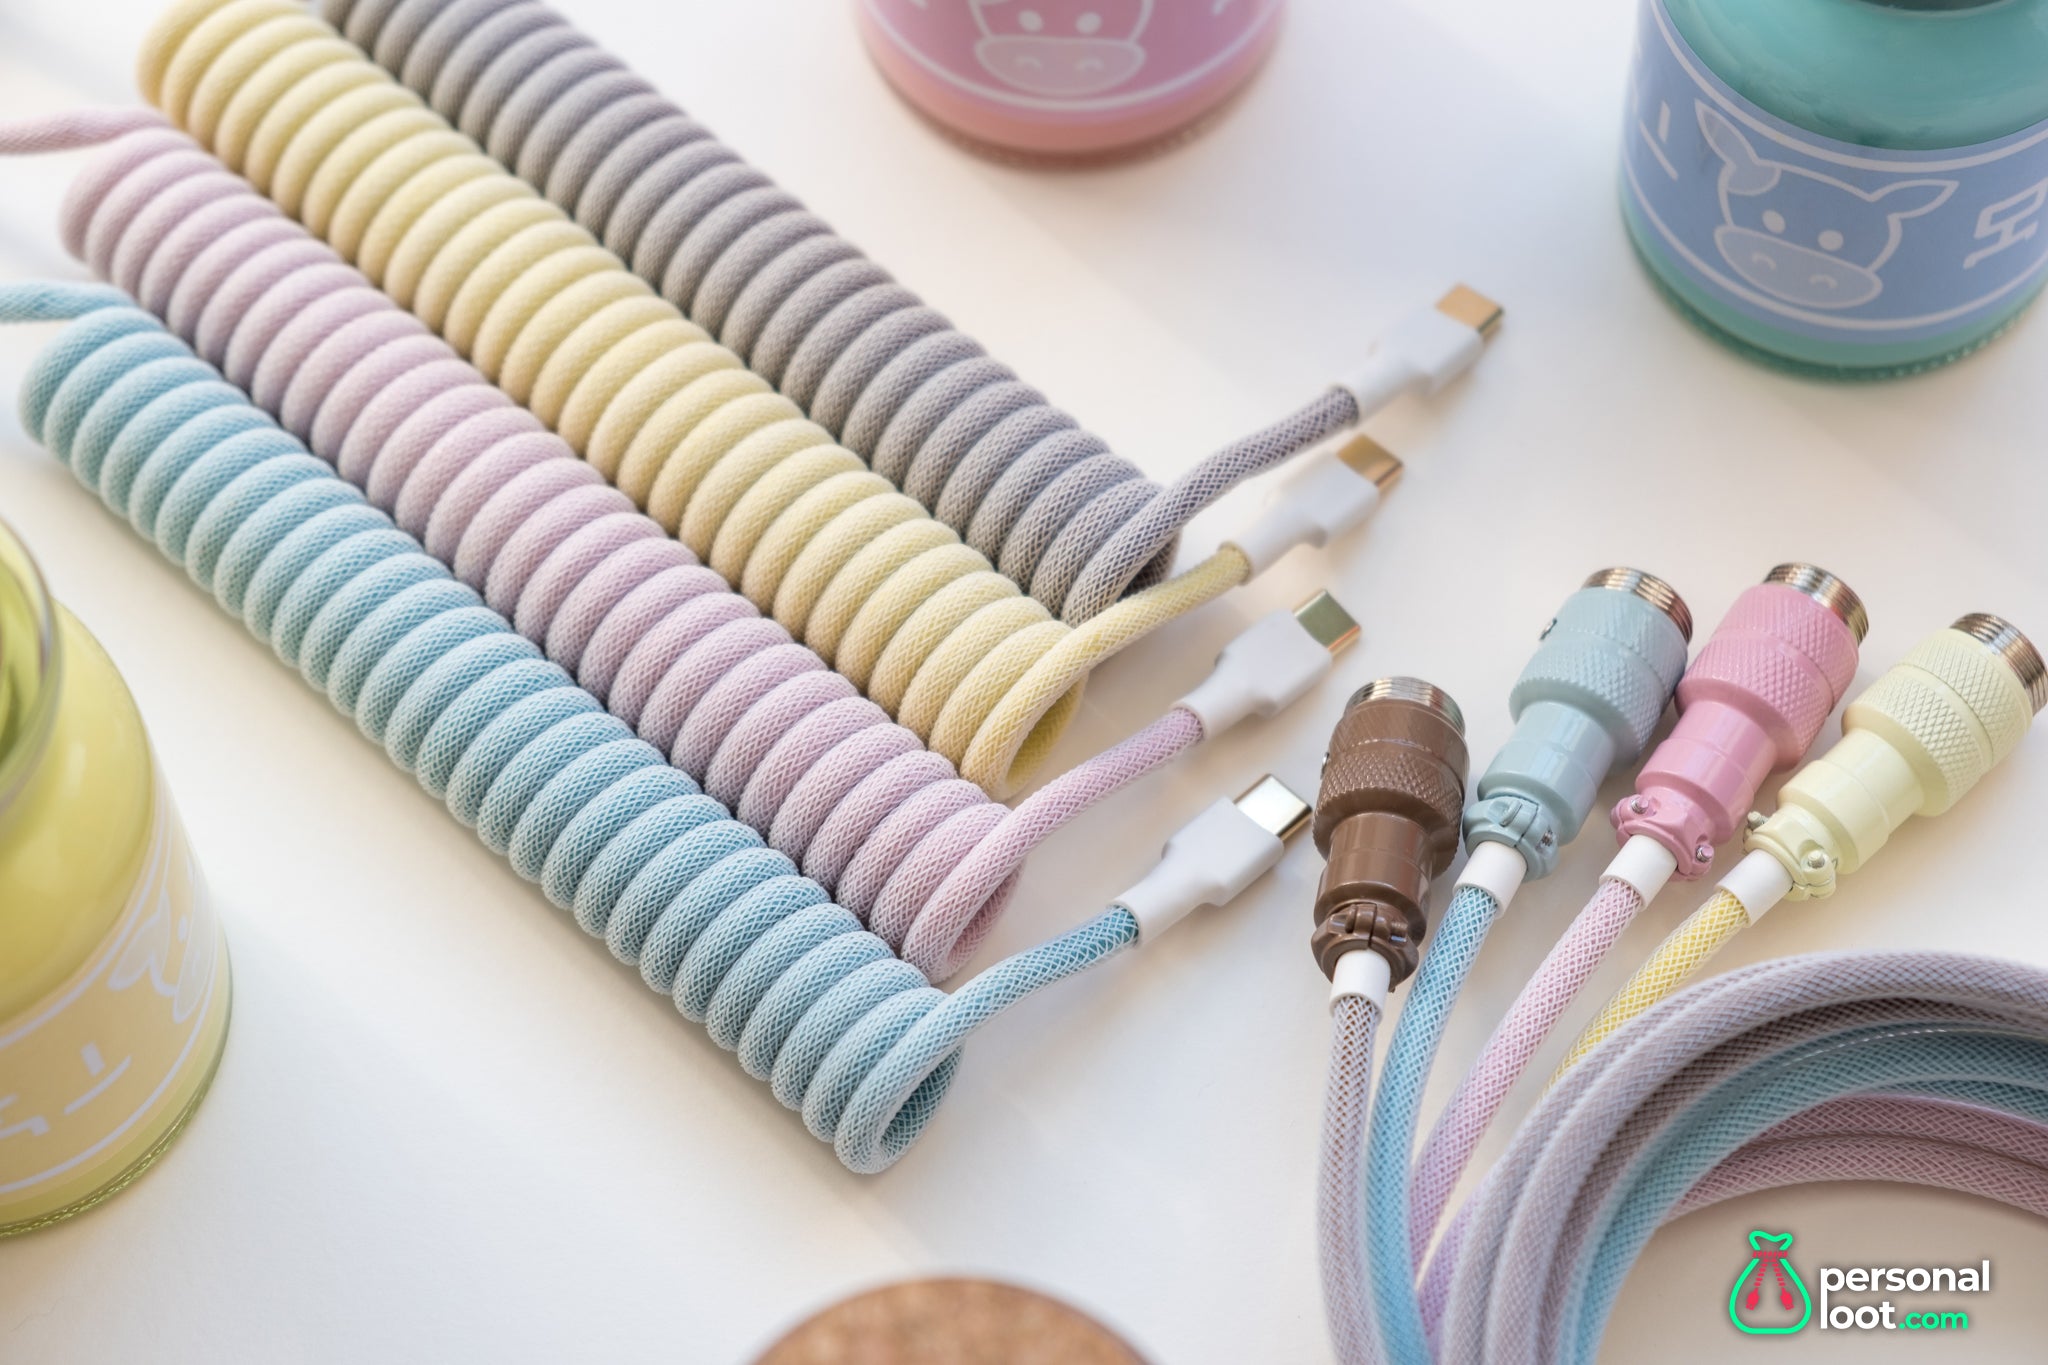 Pastel Milk Keyboard Cables